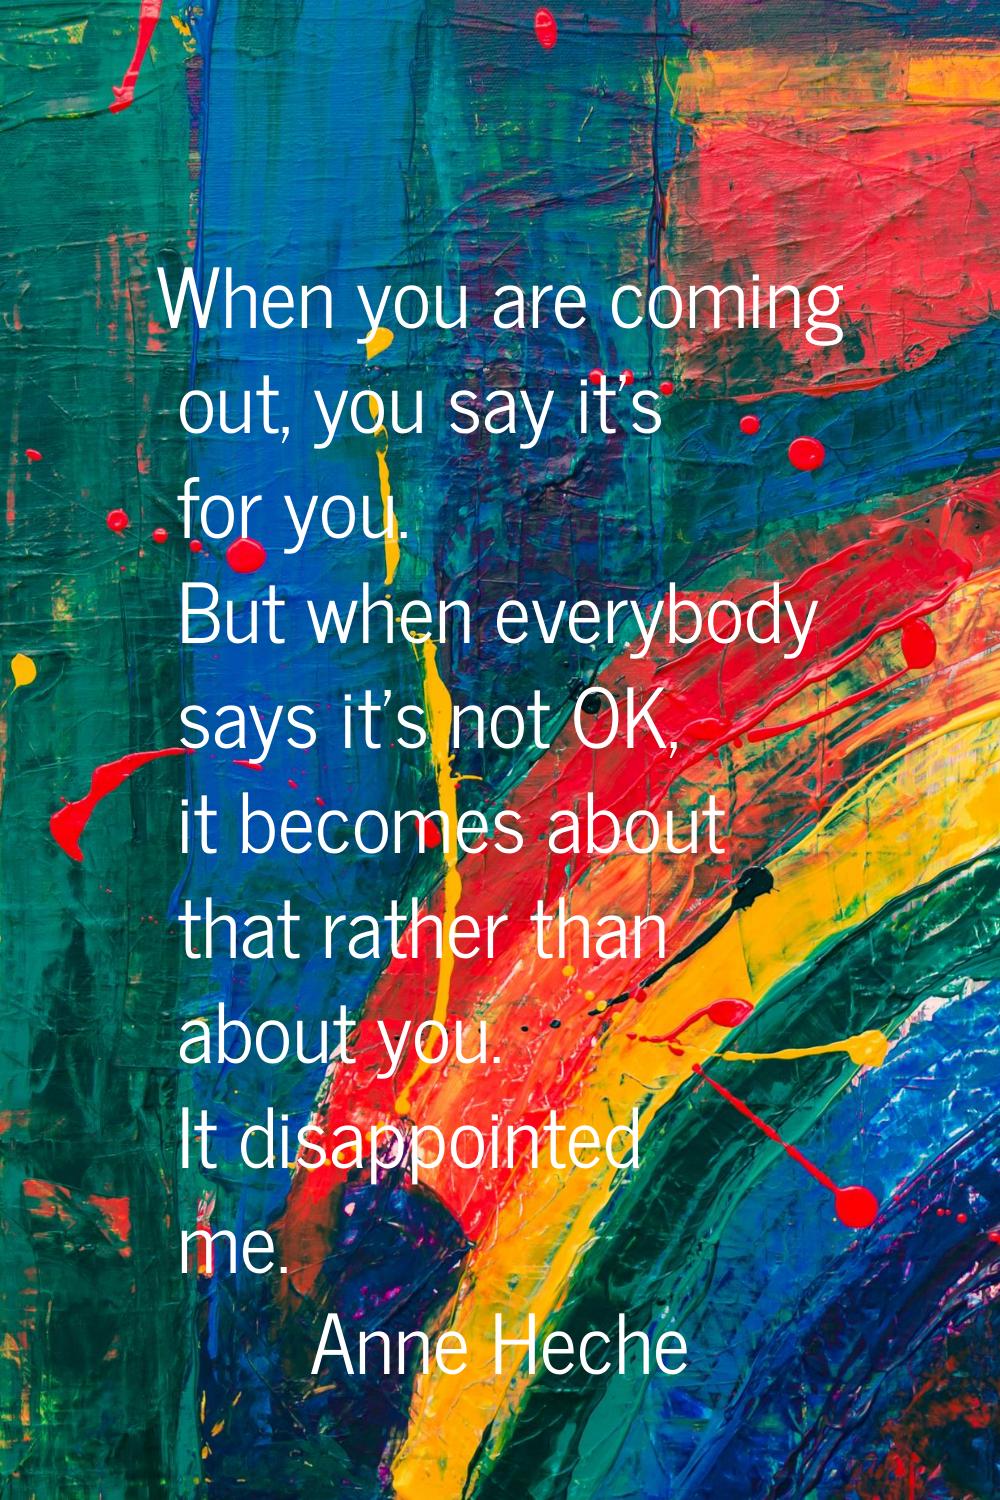 When you are coming out, you say it's for you. But when everybody says it's not OK, it becomes abou